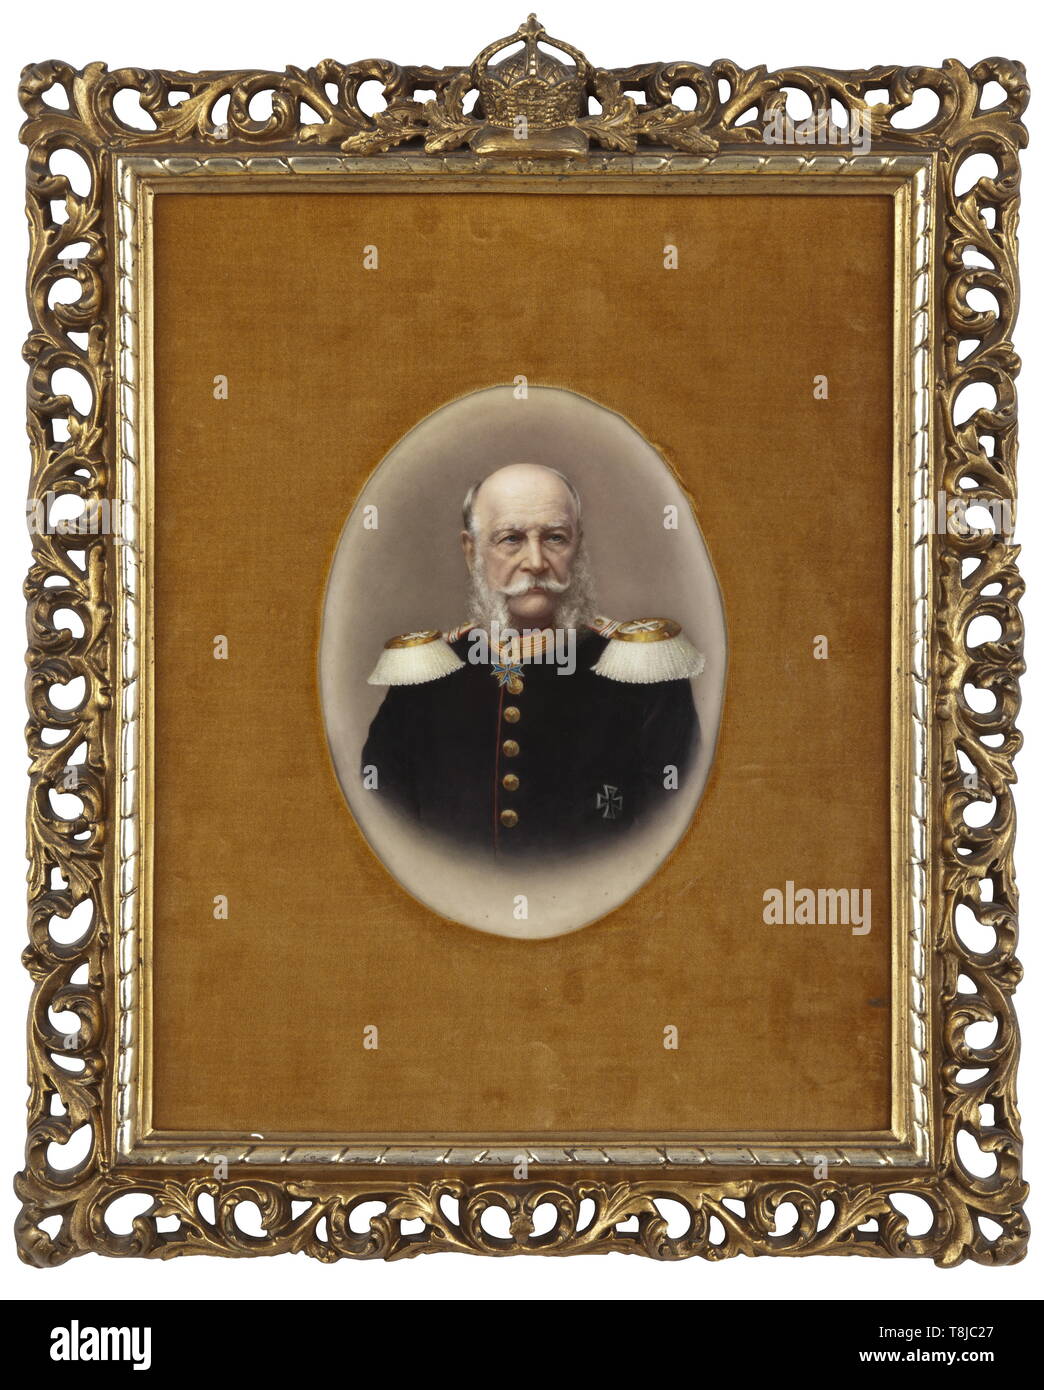 A portait of Kaiser Wilhelm I (1797 - 1888) Exquisite porcelain painting. The emperor wears the uniform tunic of a Field Marshal with the order Pour le Mérite and Iron Cross 1st Class. In an oval, velvet-covered passepartout and gilded plaster frame. Framed dimensions 35 x 43 cm. historic, historical, Prussian, Prussia, German, Germany, militaria, military, object, objects, stills, clipping, clippings, cut out, cut-out, cut-outs, 19th century, Additional-Rights-Clearance-Info-Not-Available Stock Photo